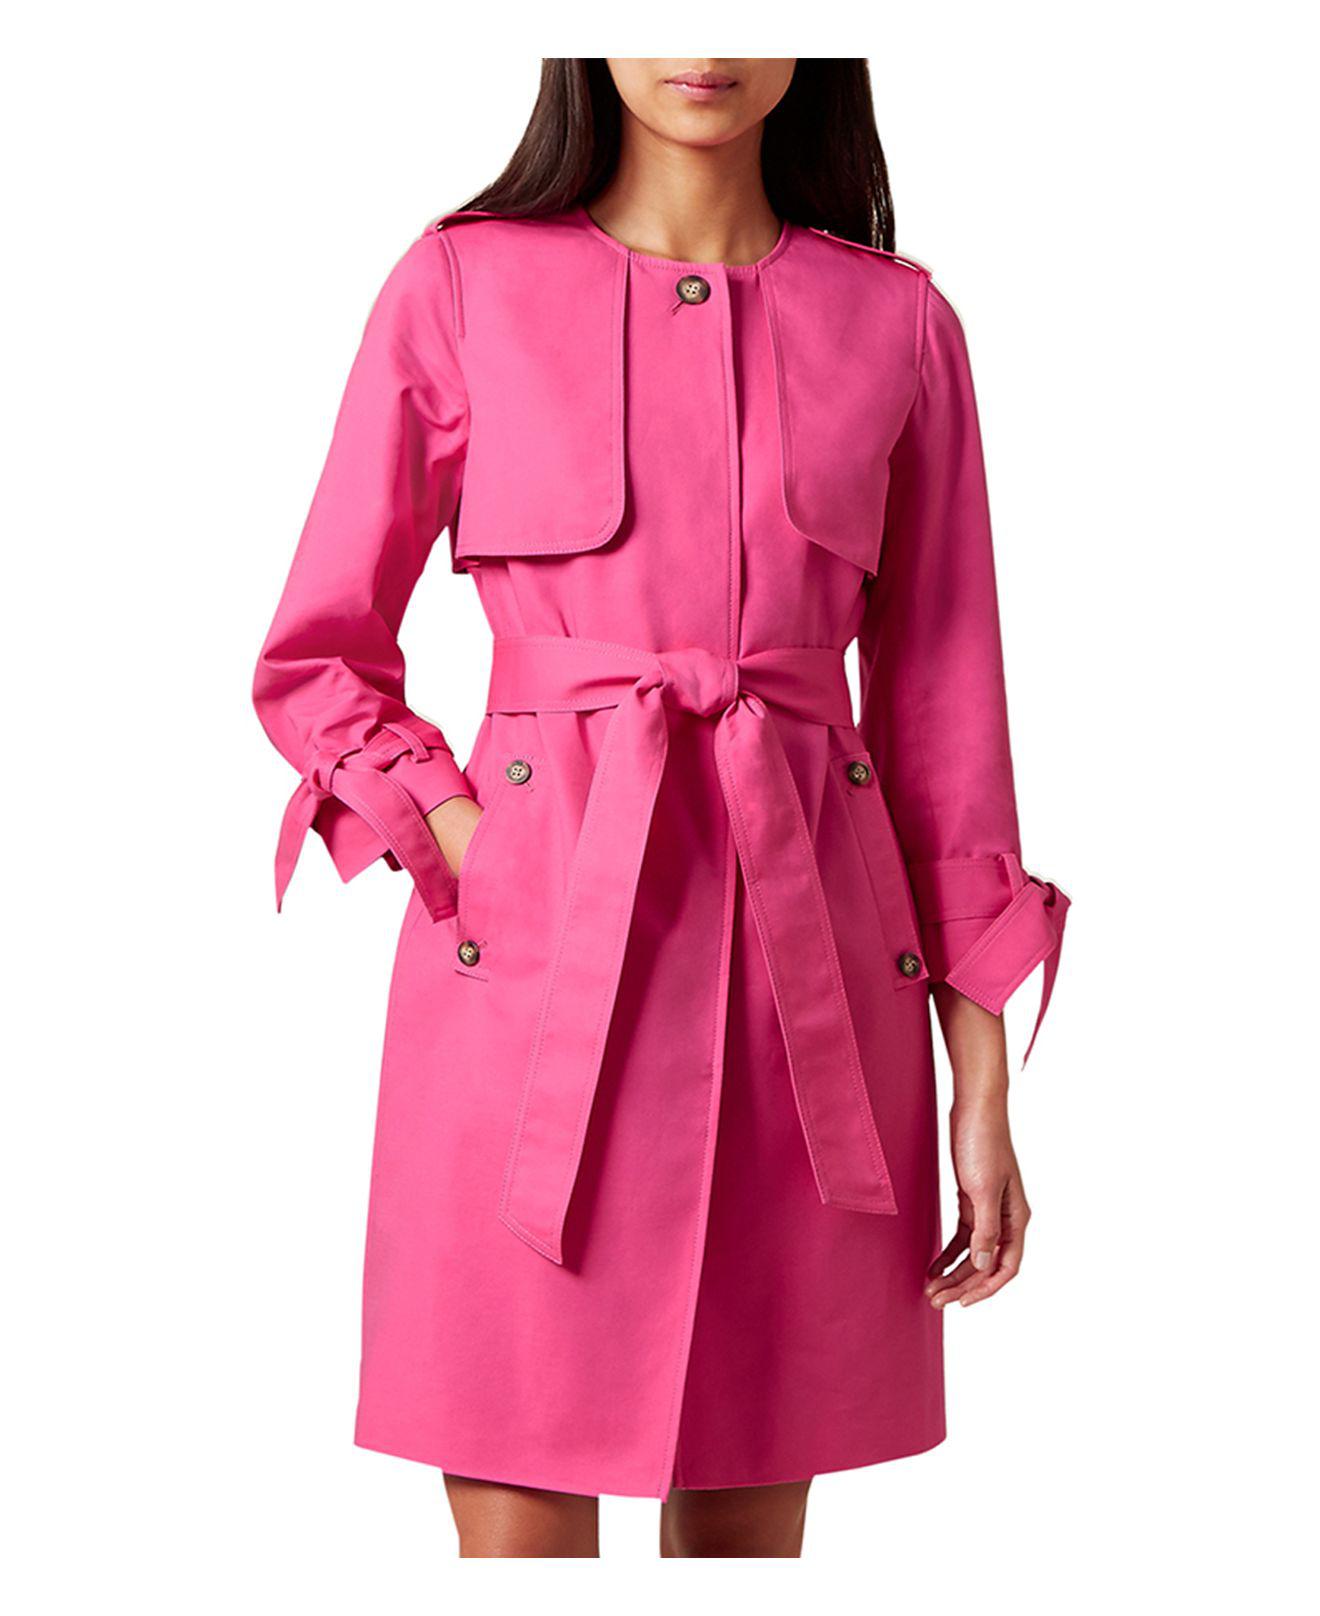 Hobbs Molly Trench Coat in Pink | Lyst